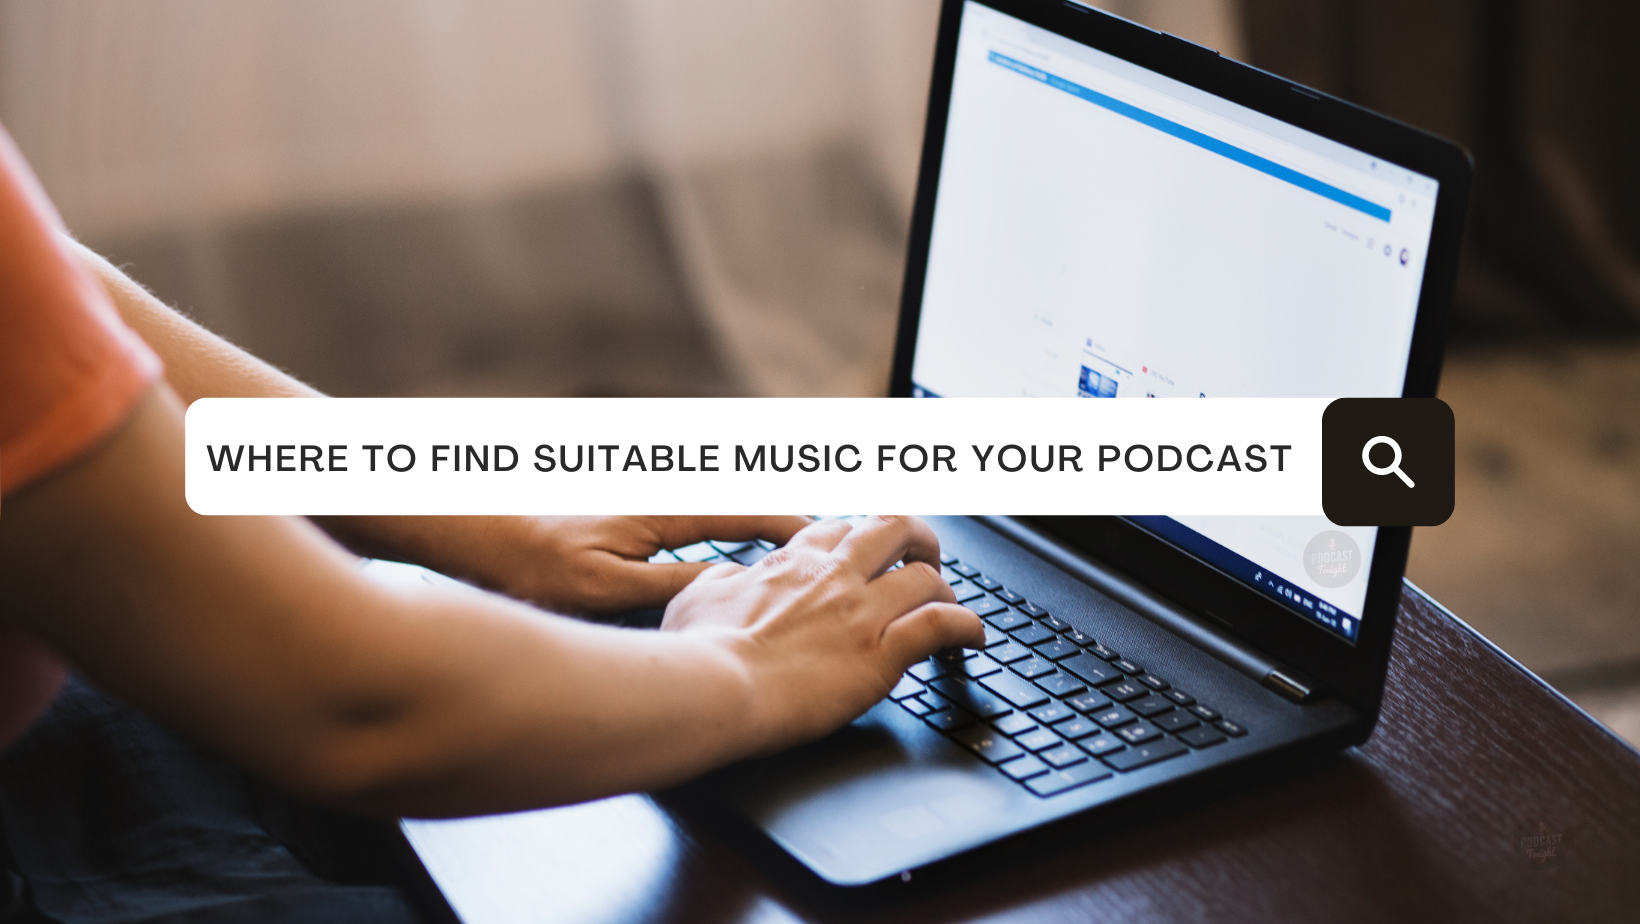 Where to Find Suitable Music for Your Podcast